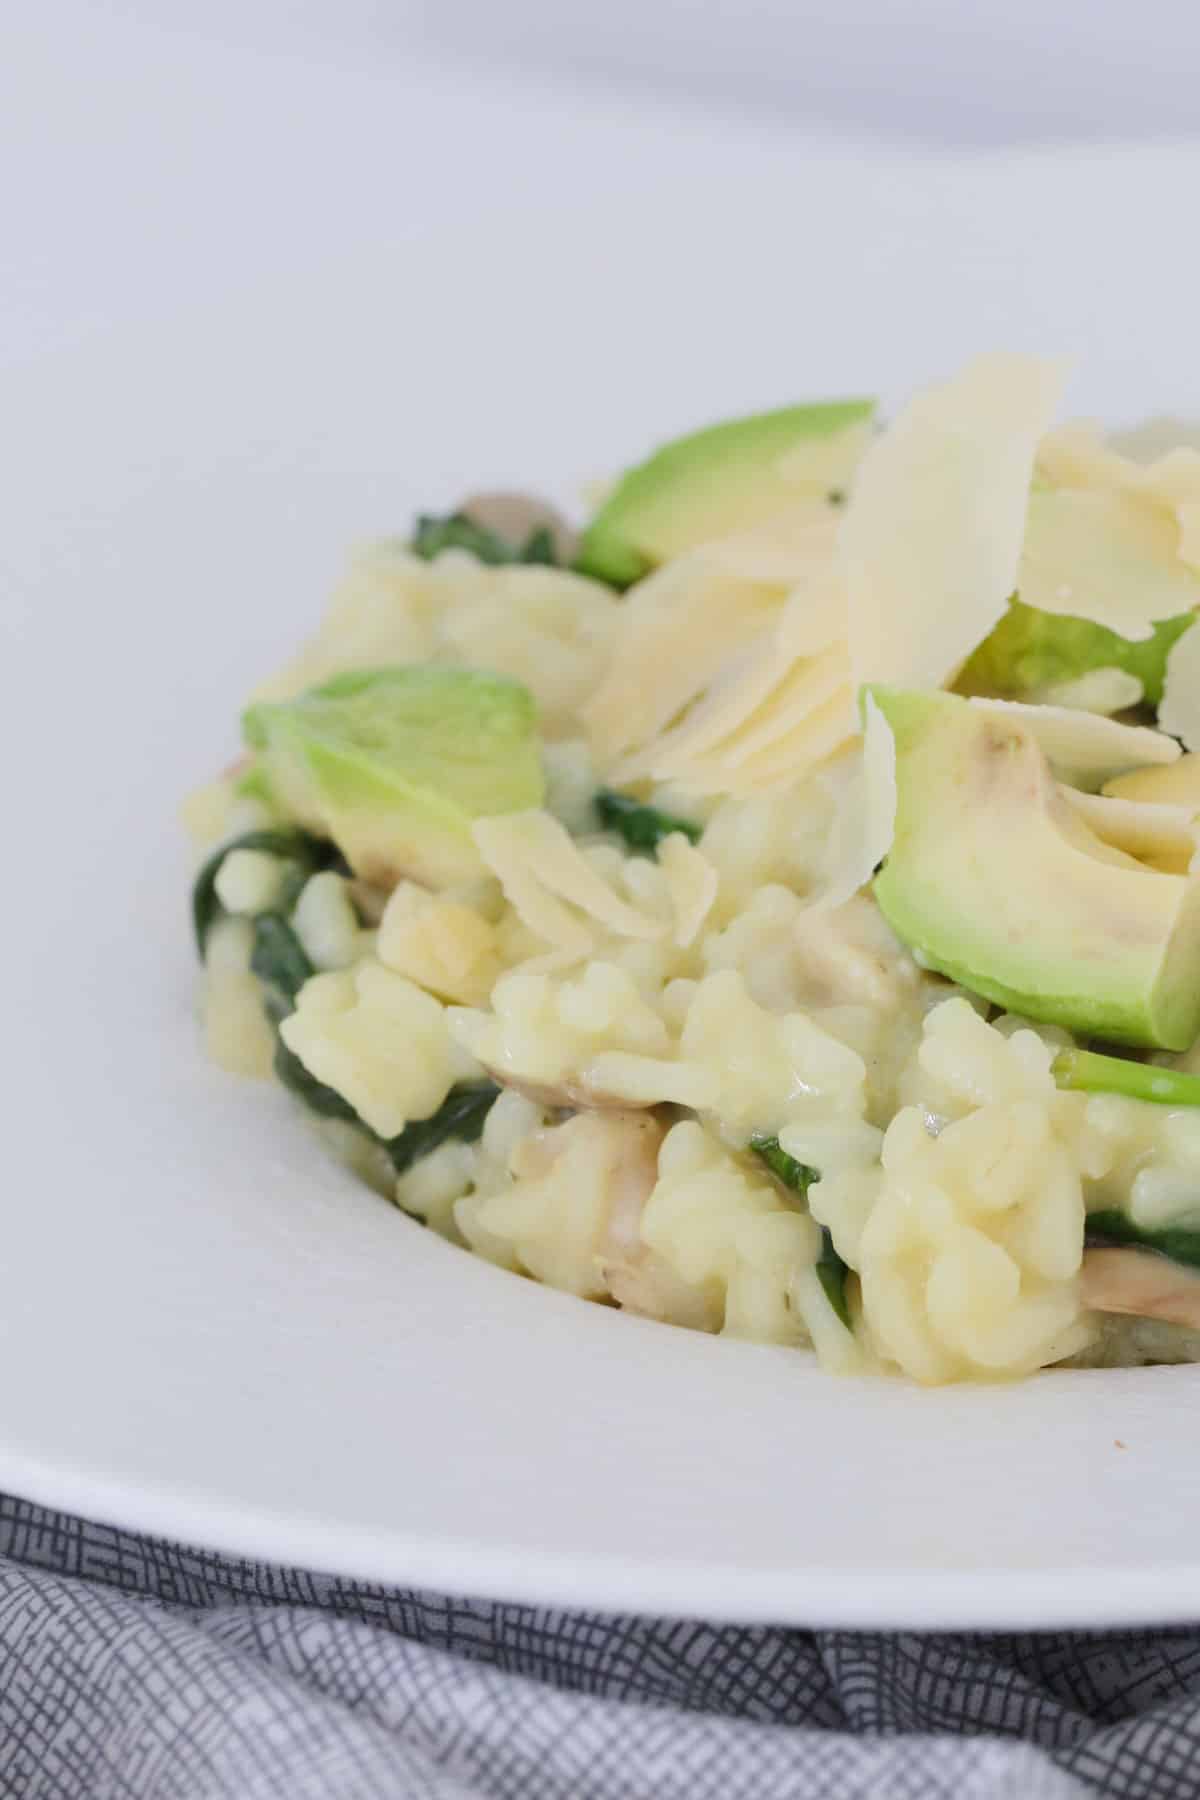 A risotto with baby spinach and avocado.